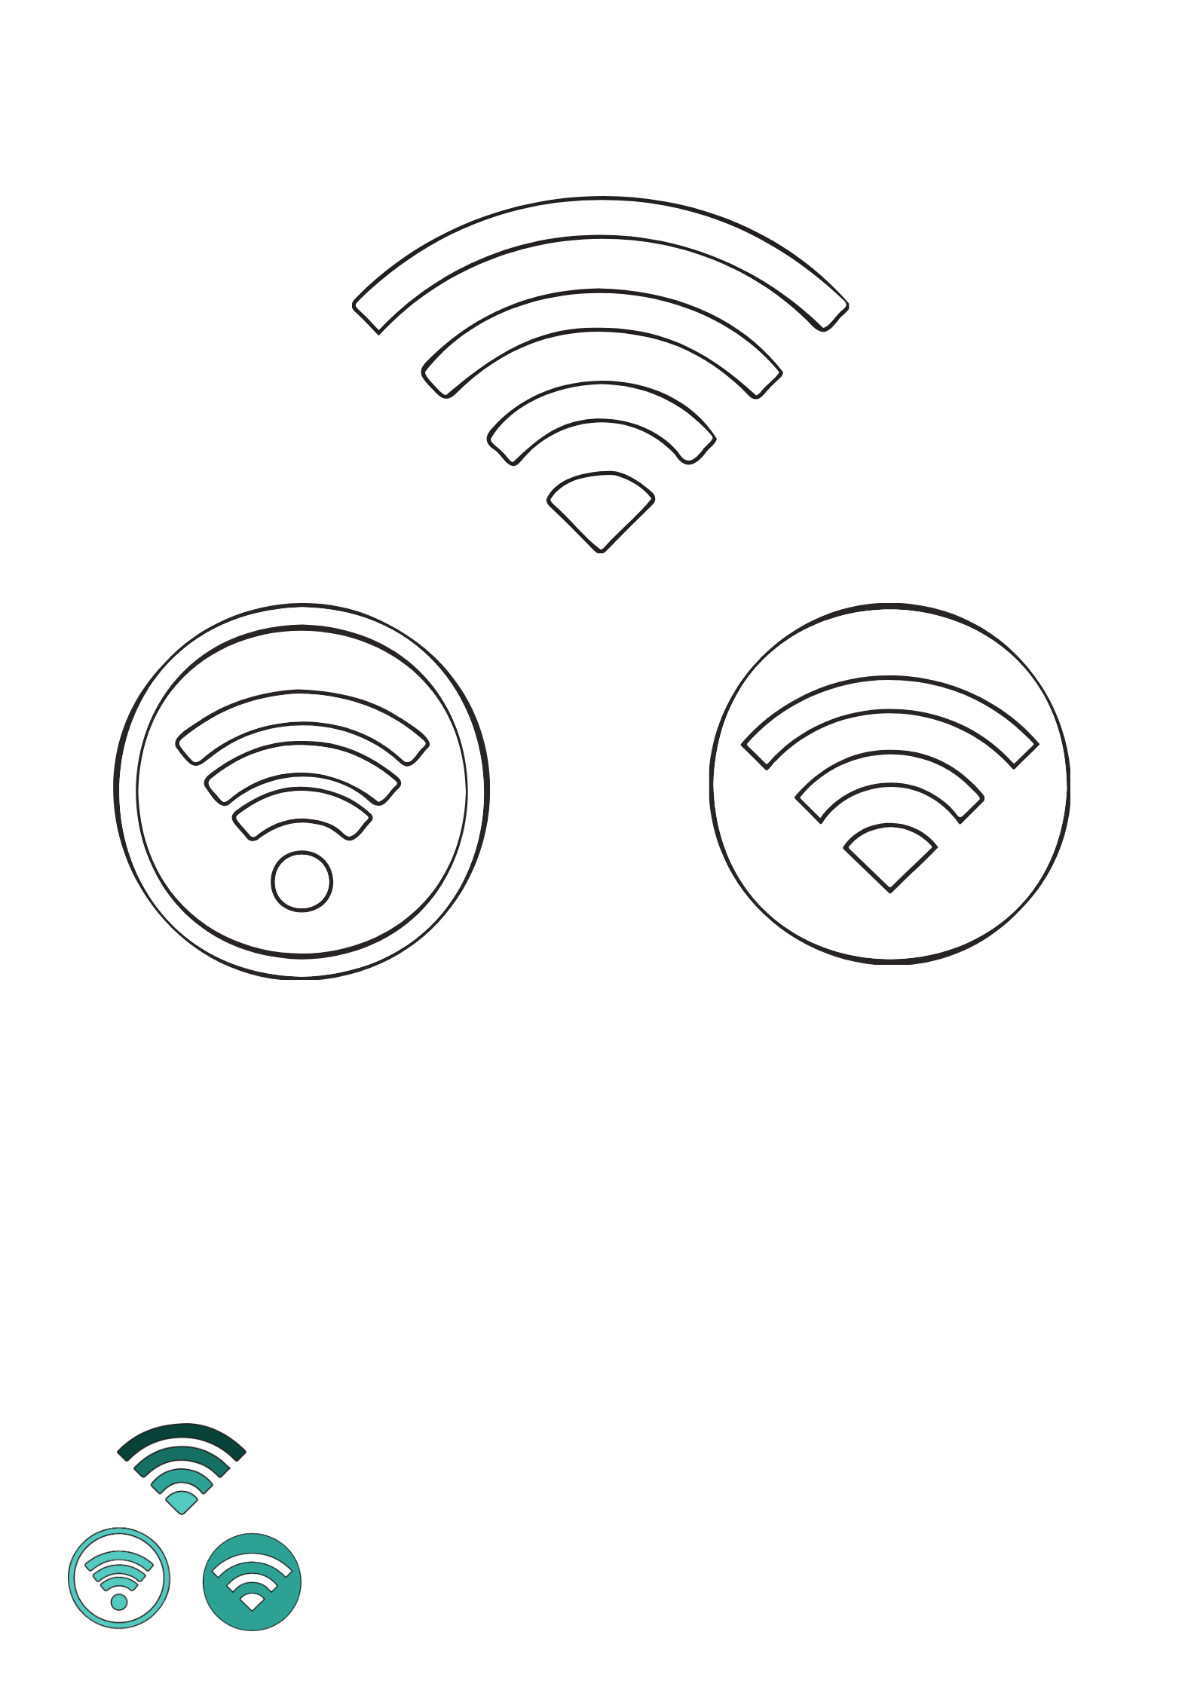 Wifi Shape coloring page Template